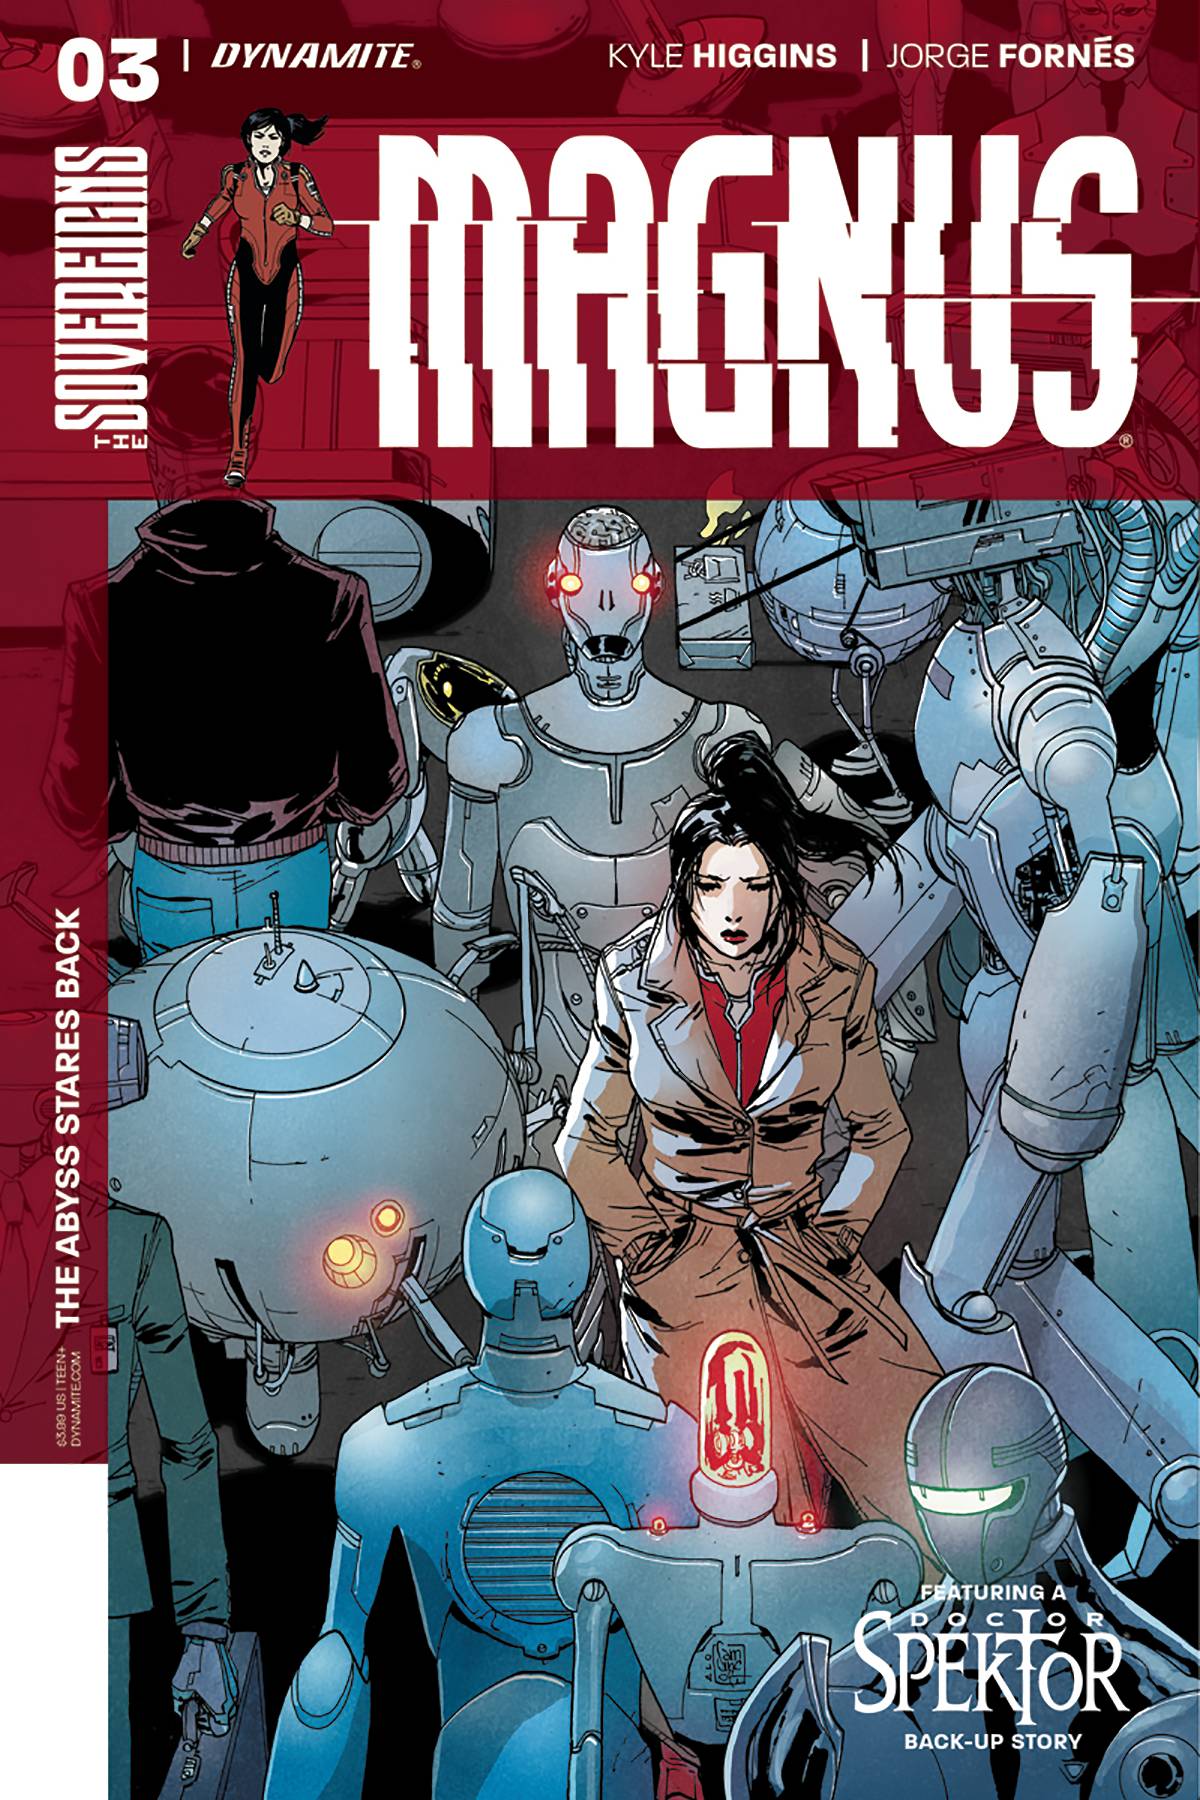 'Magnus' #3, out now from Dynamite